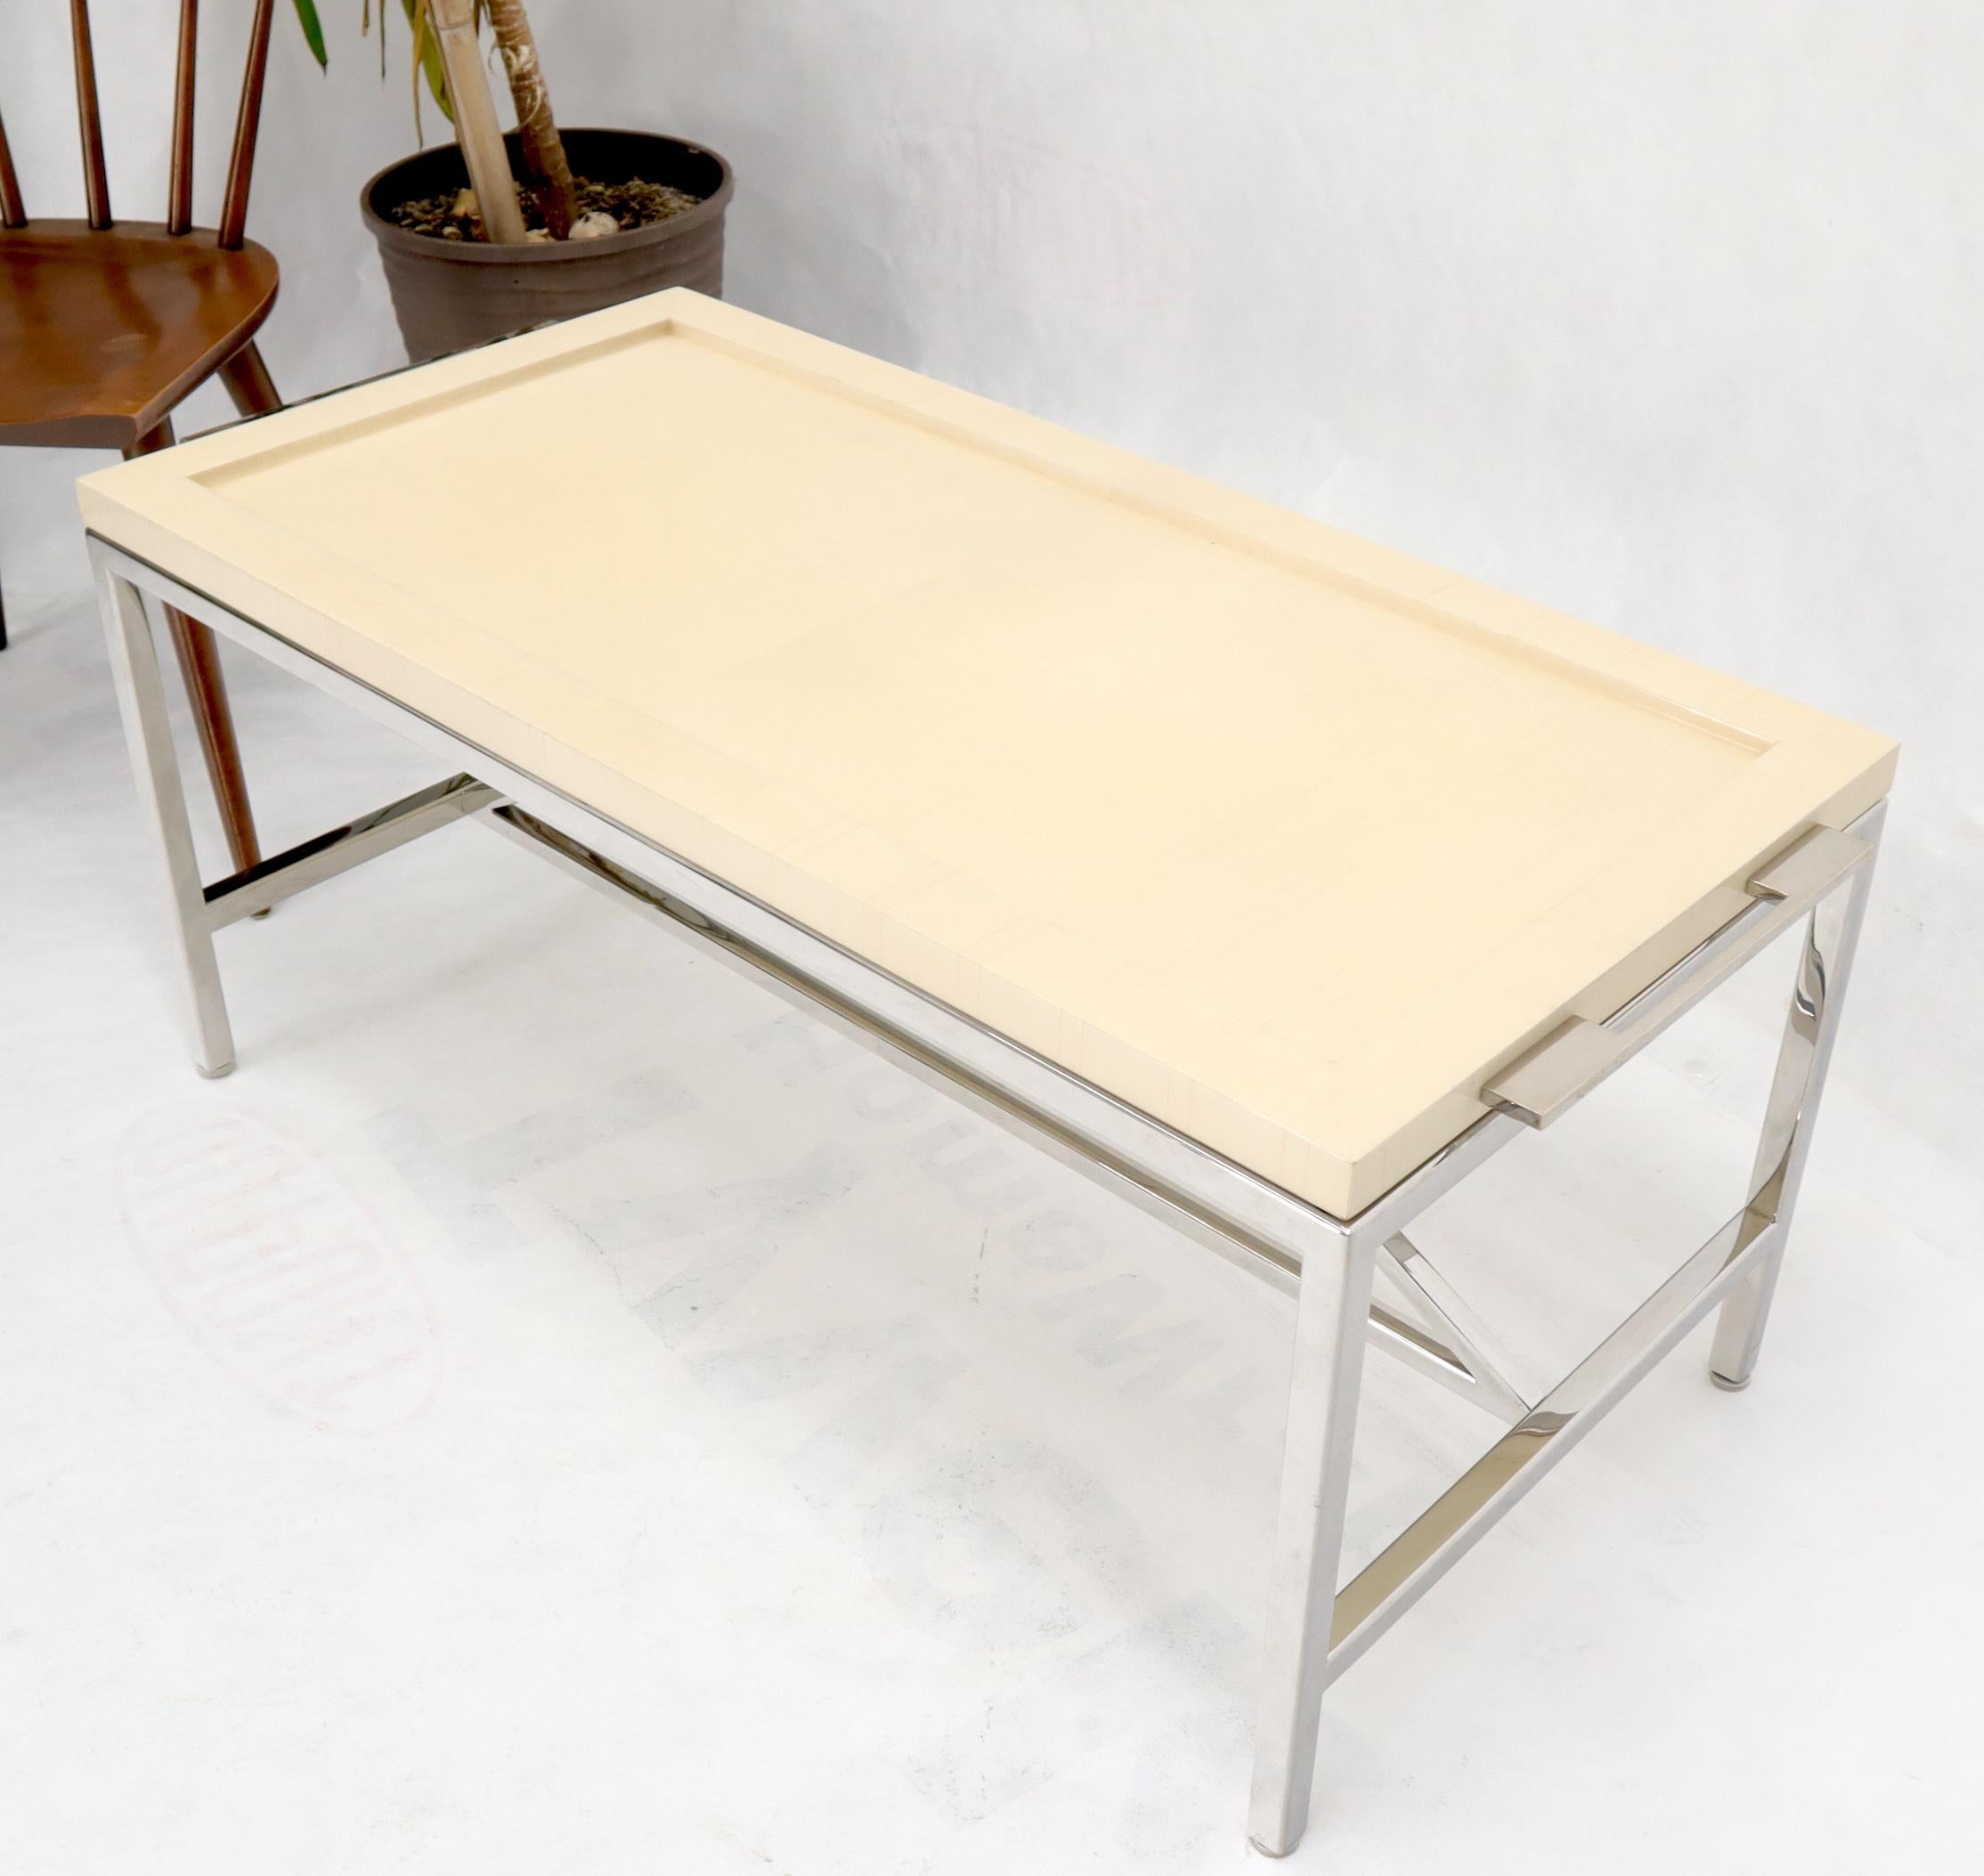 20th Century Lacquered Parchment Tray Stainless Steel Base Coffee Table For Sale